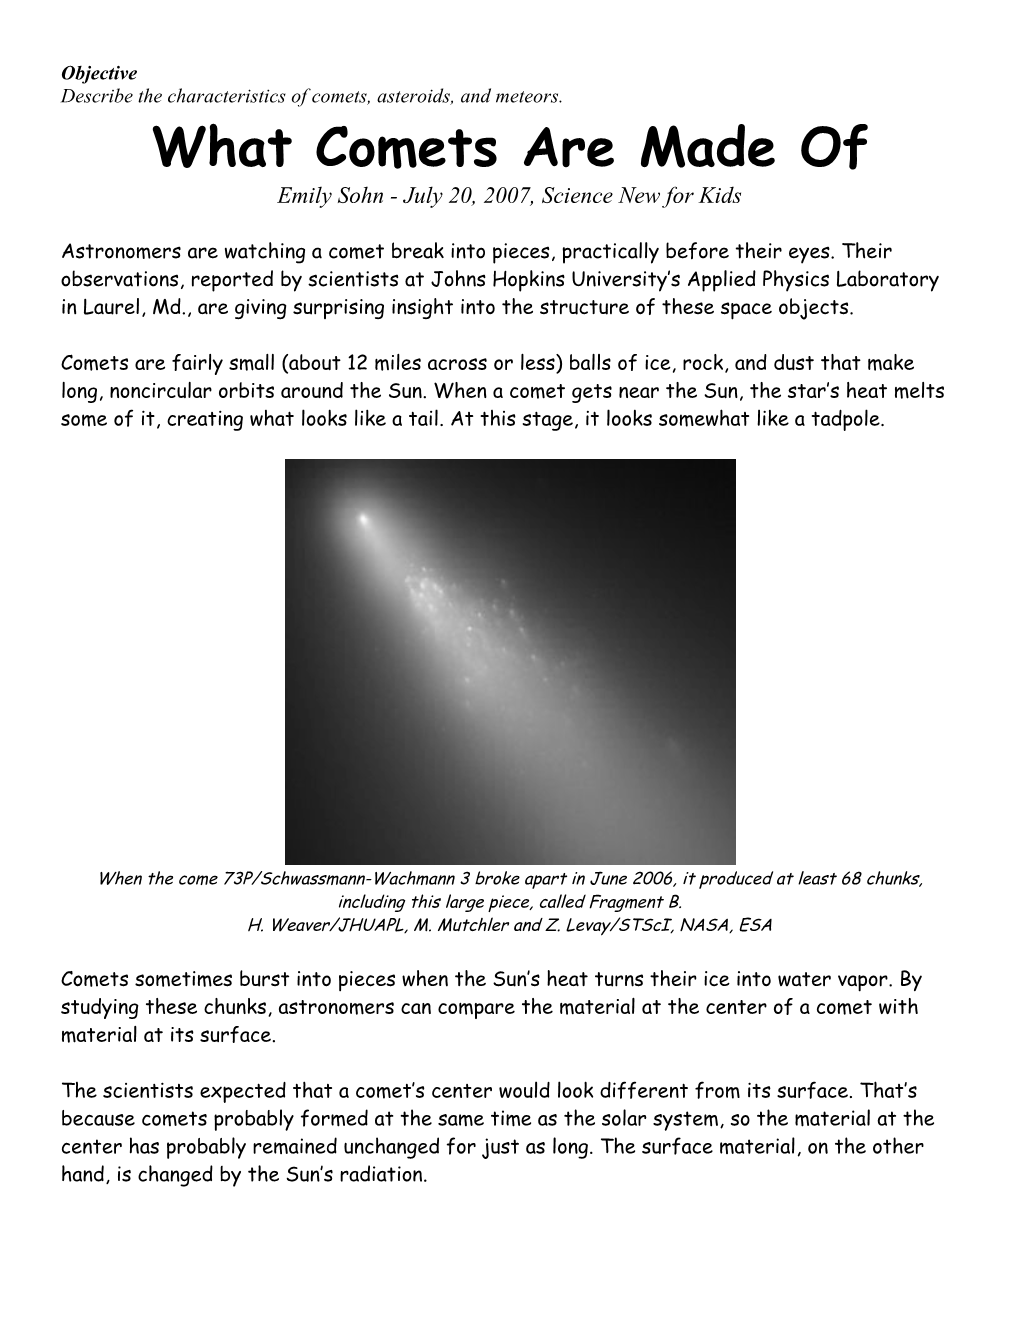 Describe the Characteristics of Comets, Asteroids, and Meteors